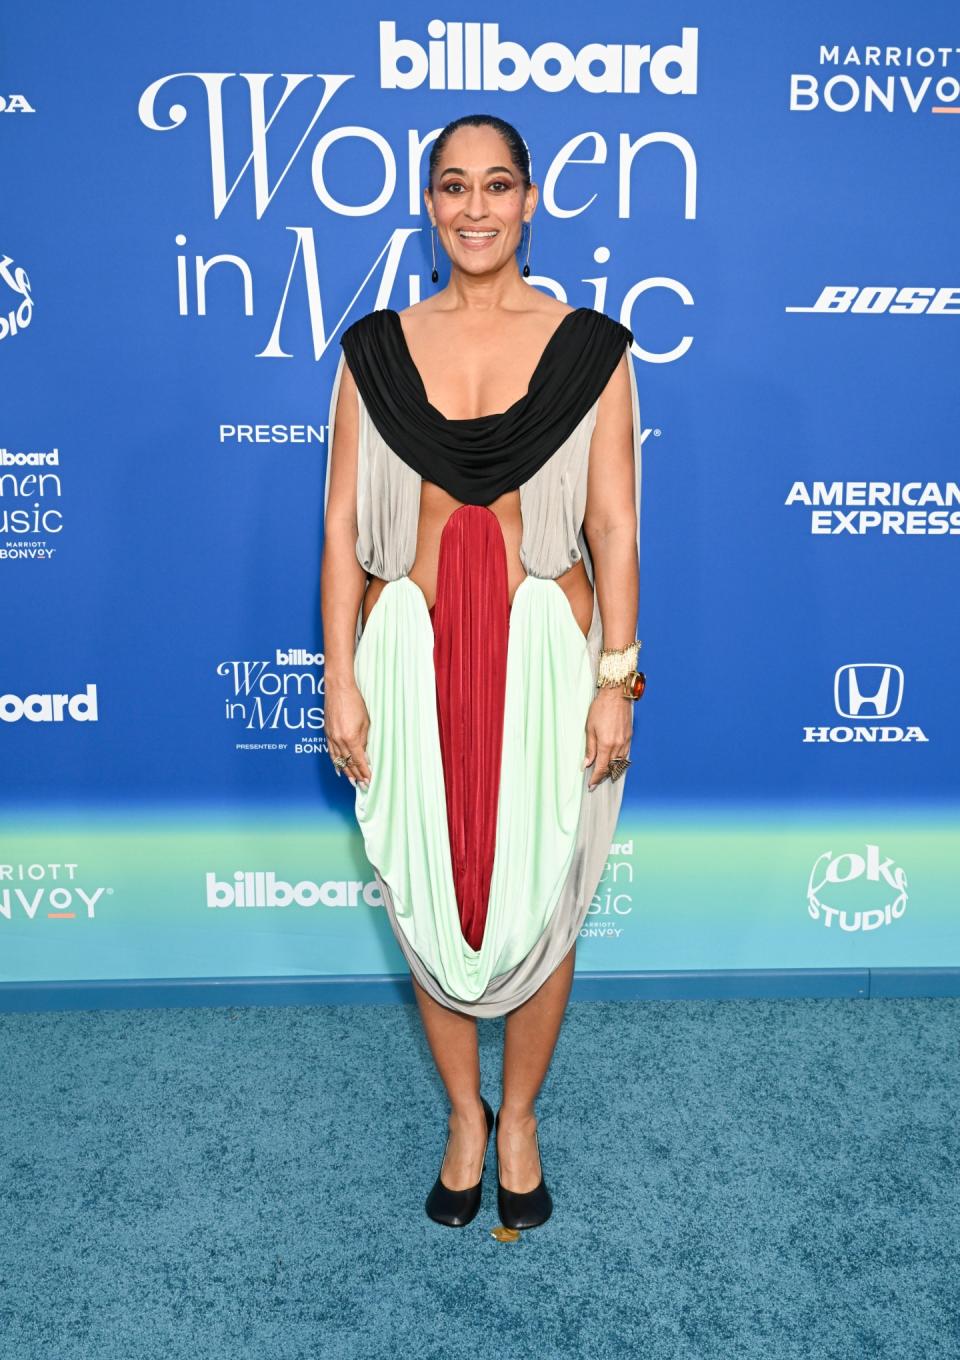 Tracee Ellis Ross at the Billboard Women in Music Awards.